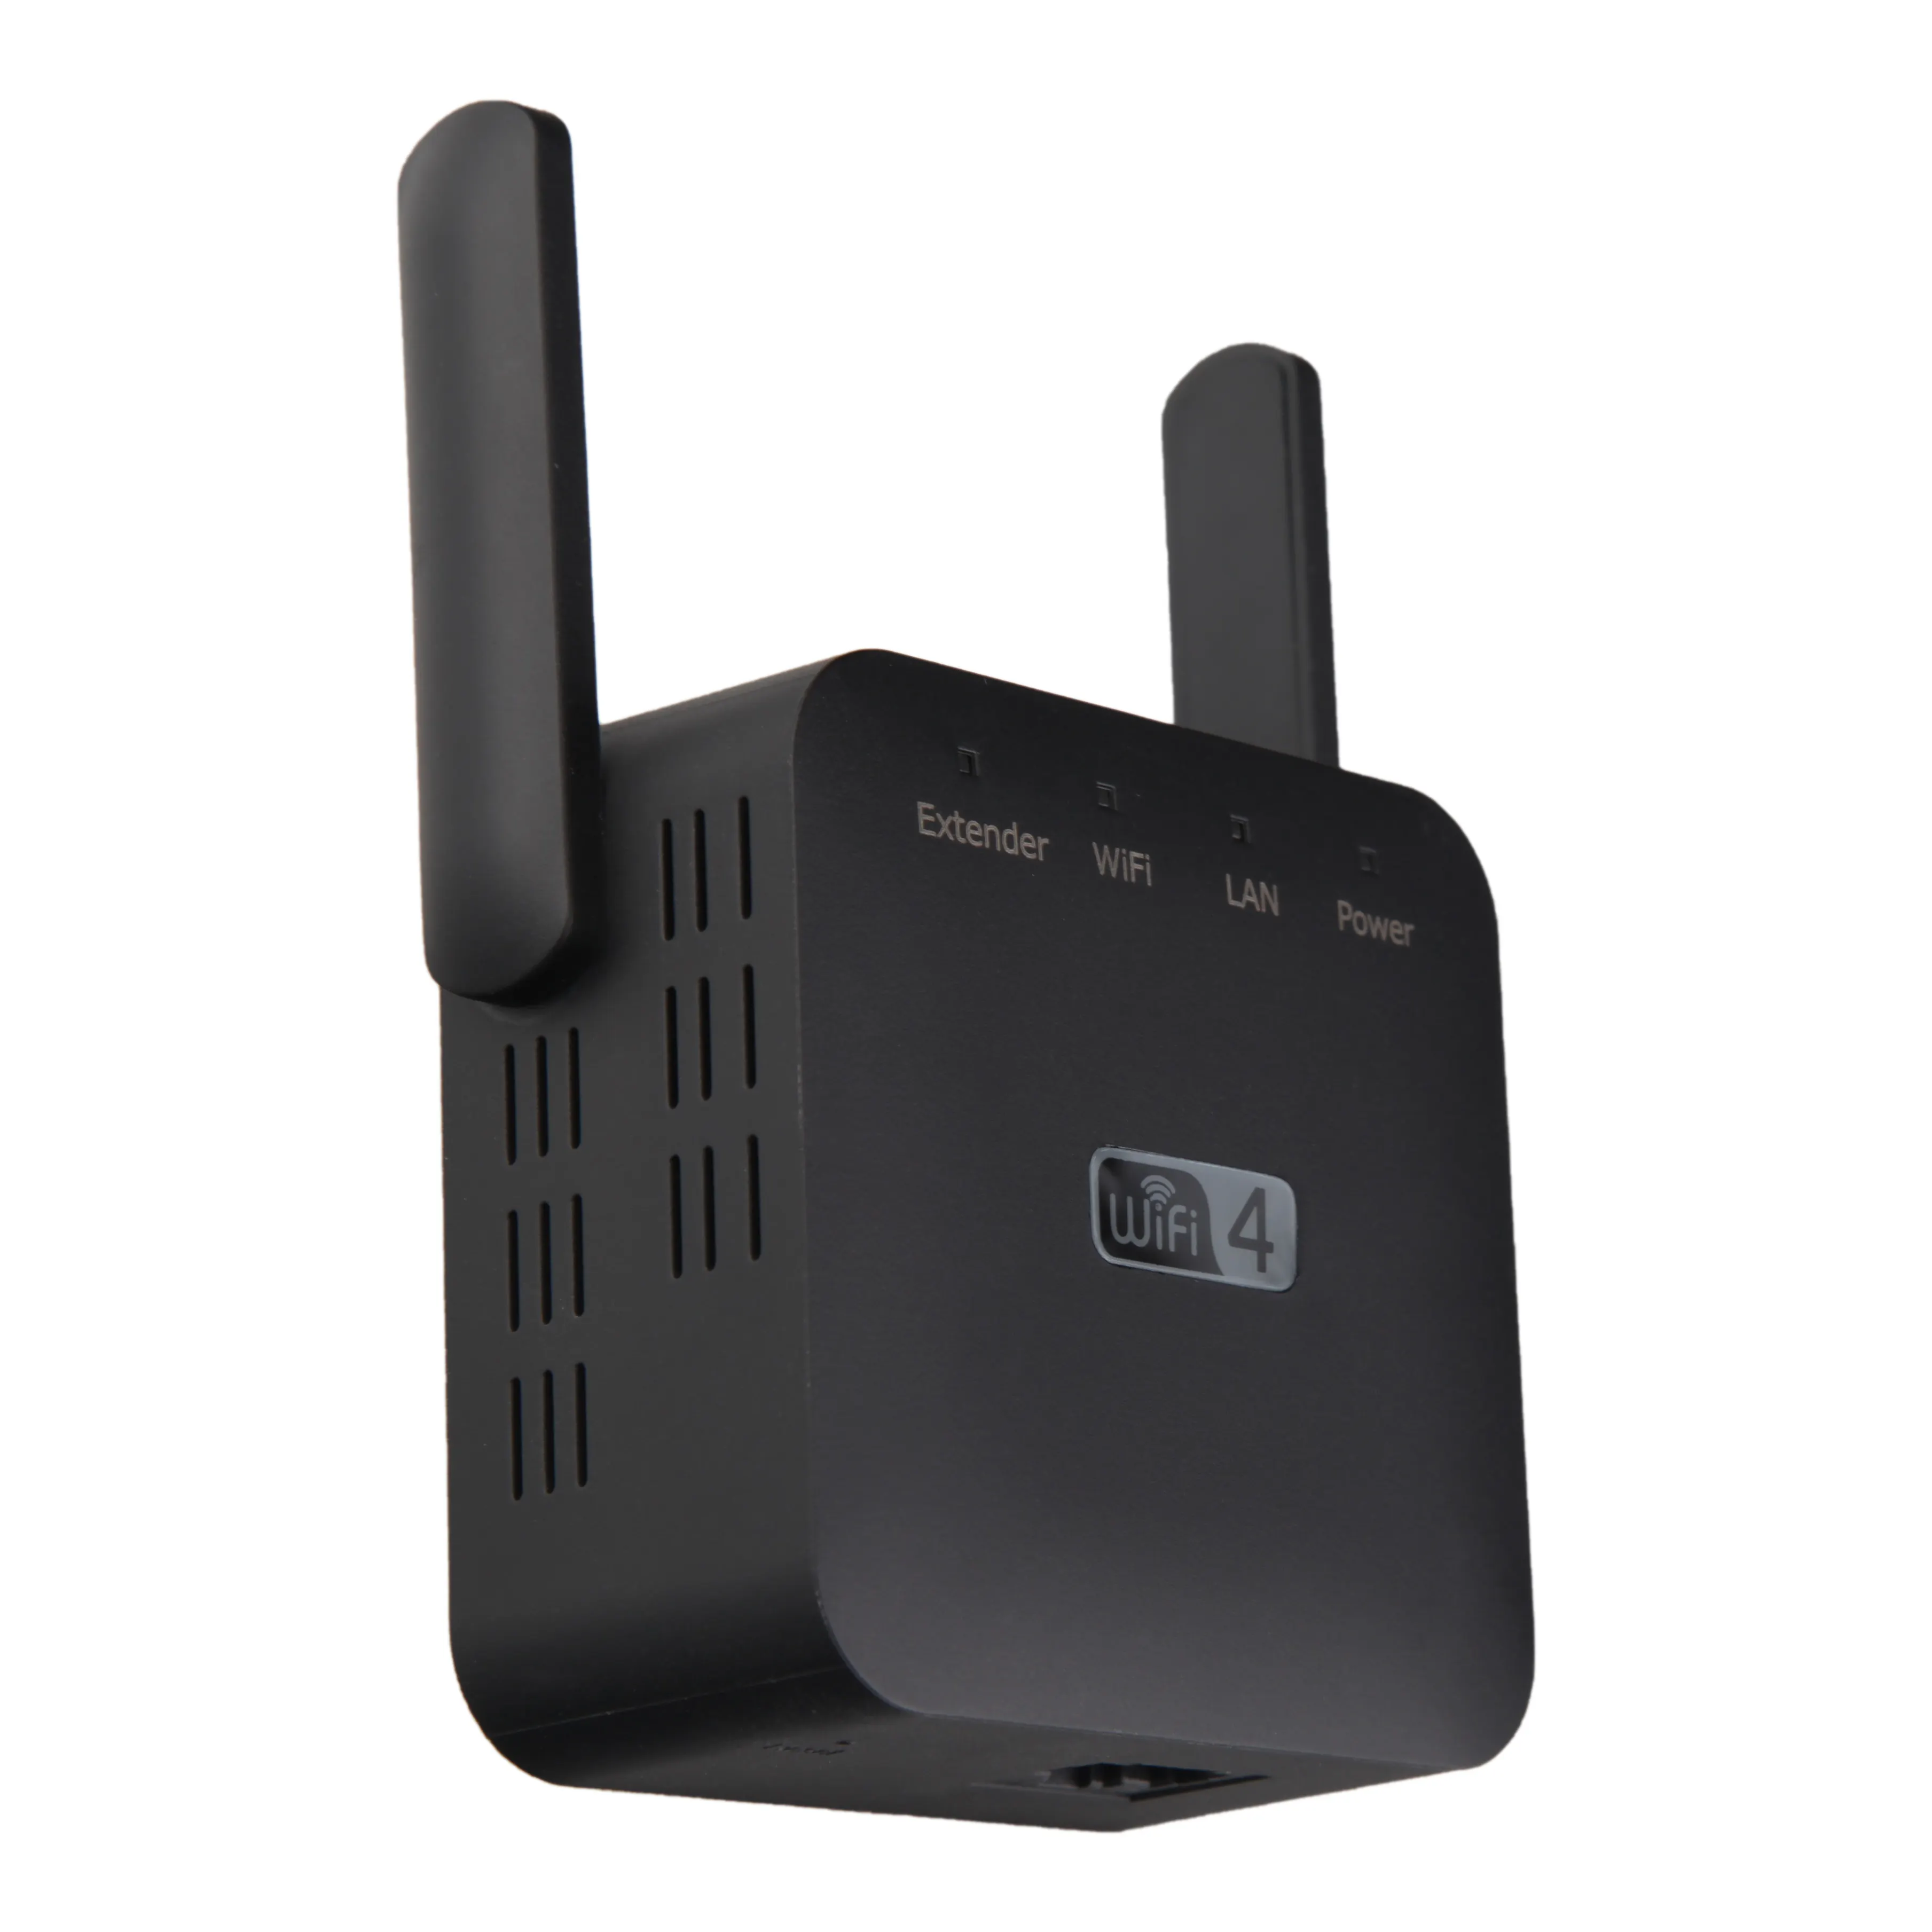 Signal Power Booster Network 500 Meter Mini Wifi Wireless Router 800 Meters Repeater Keyless